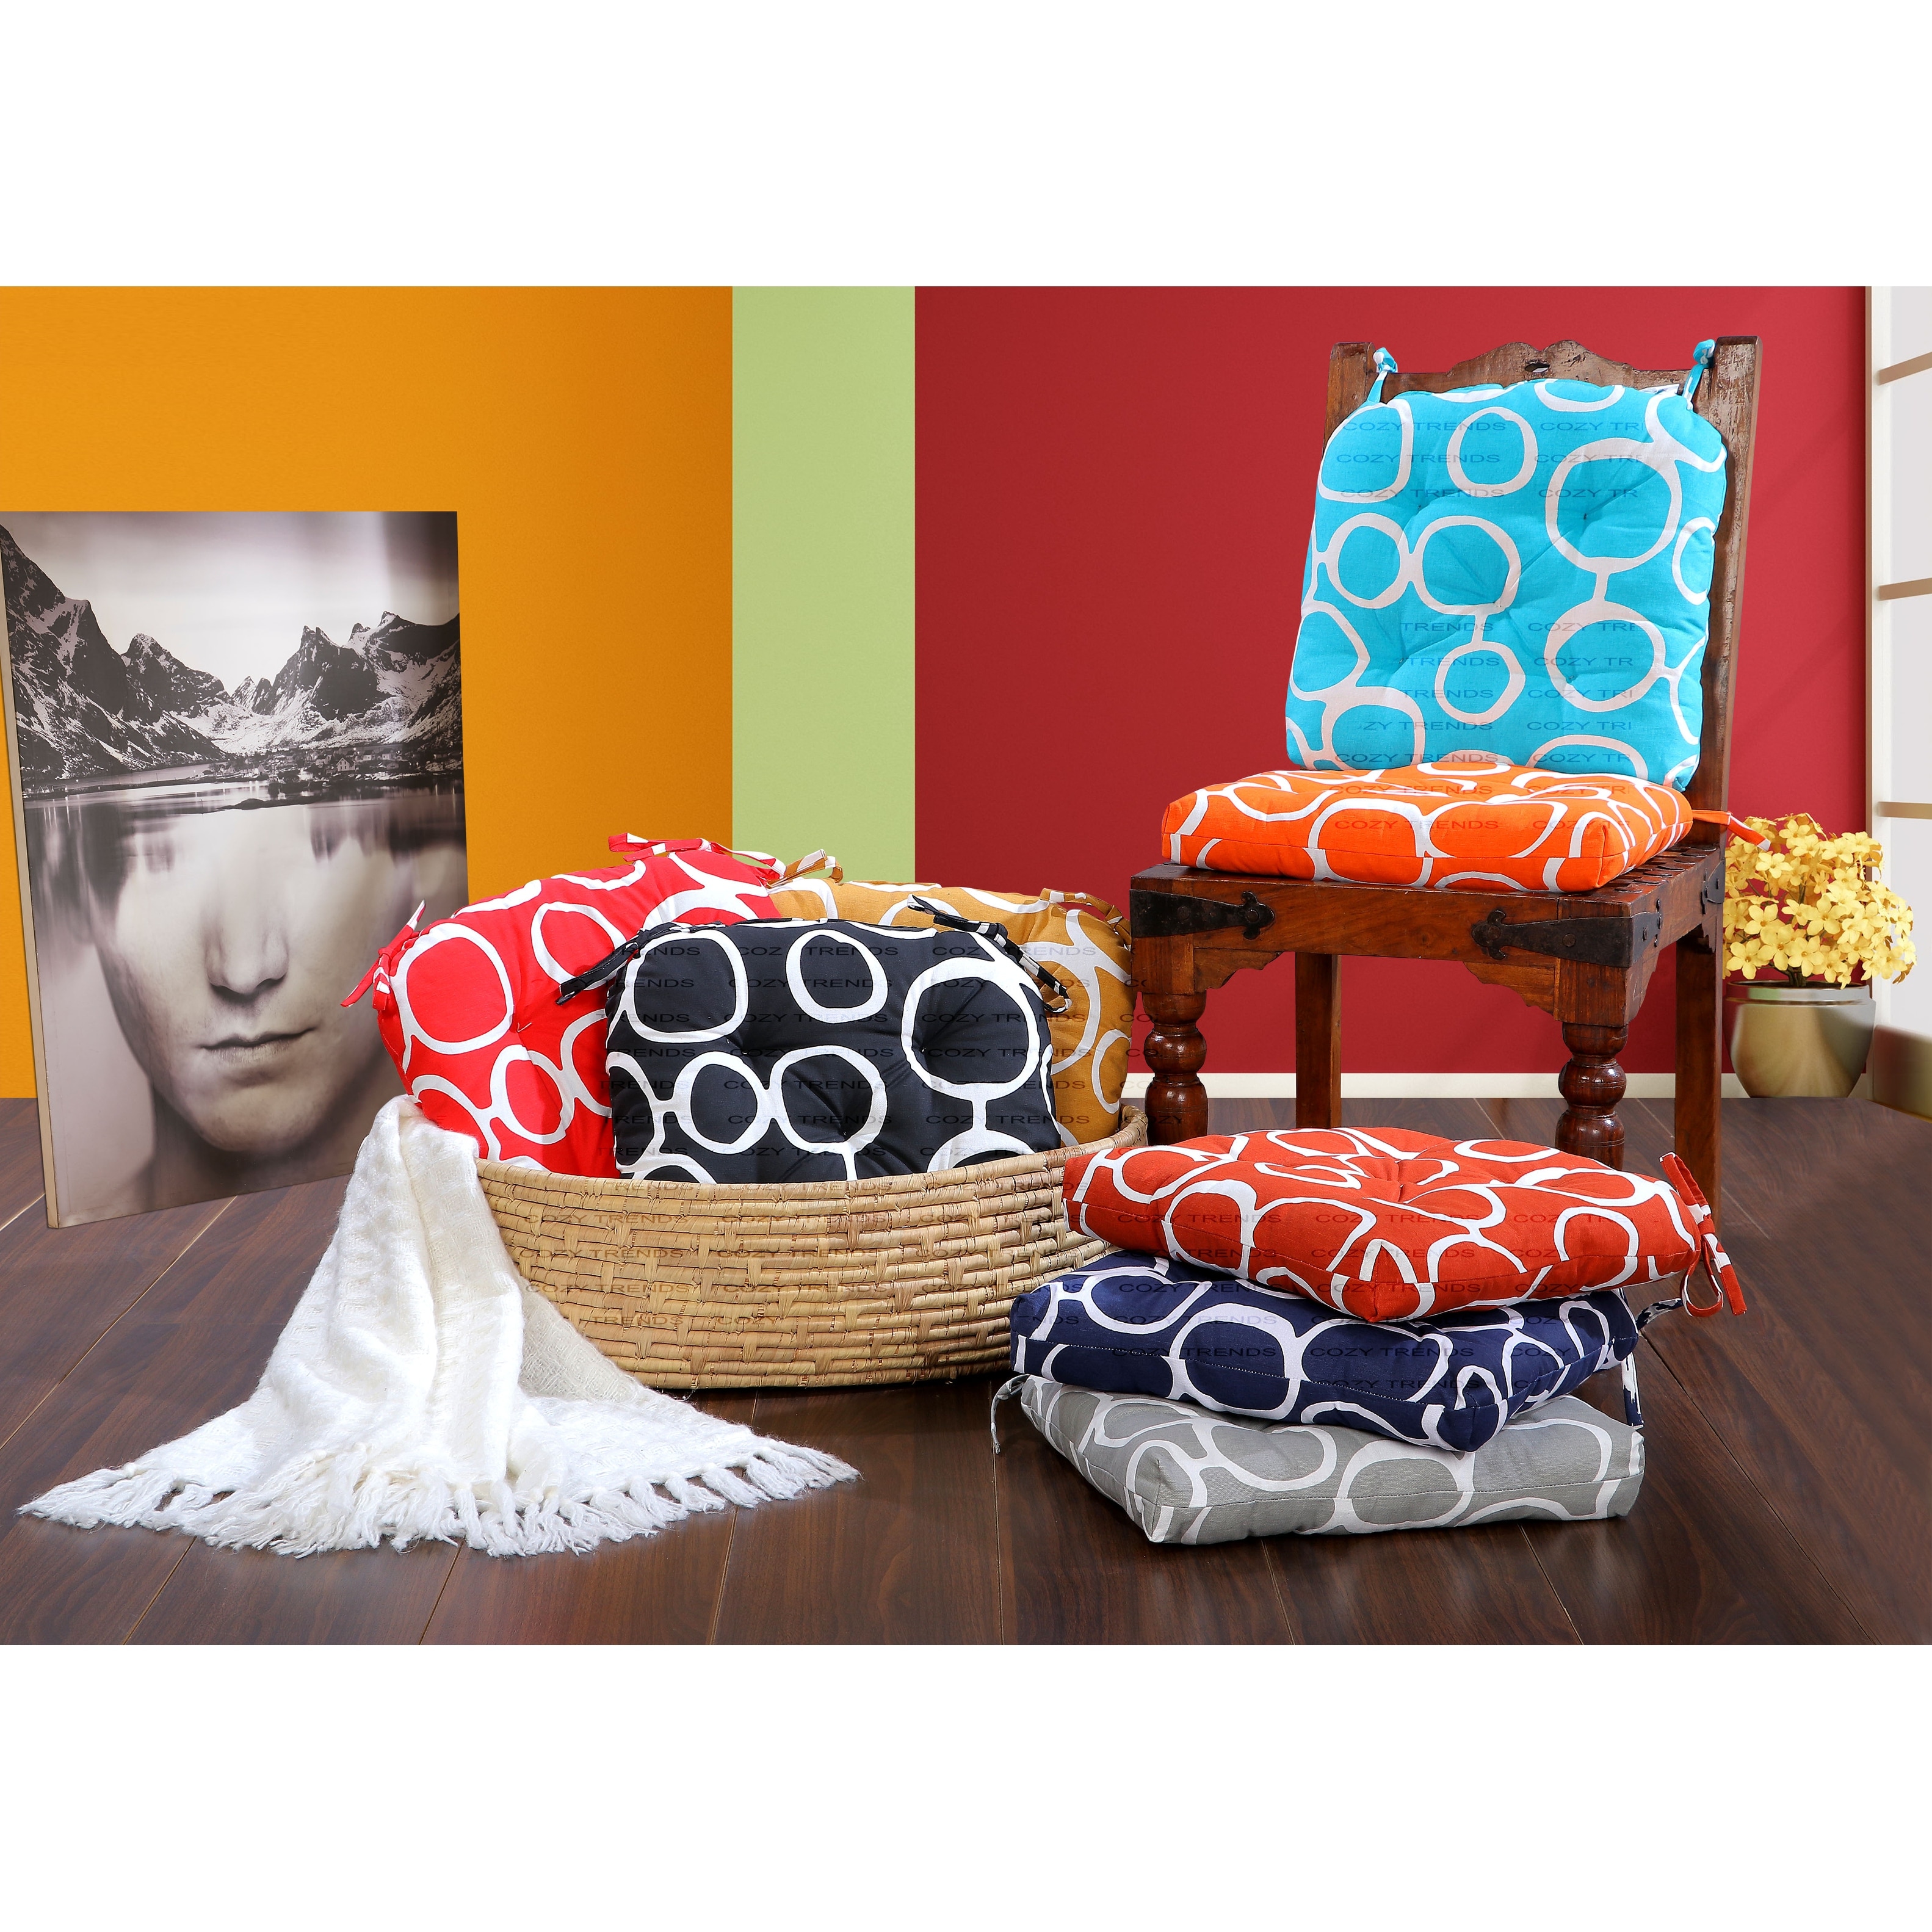 https://ak1.ostkcdn.com/images/products/is/images/direct/7d8b747bf79b3ac8cc07f71df1a81b2379c0038d/U-shape-Handmade-Cotton-Cushion%2C-Cushions-for-chair%2C-chair-cushion%2C-Pad-with-ties-16X16-Inches.jpg